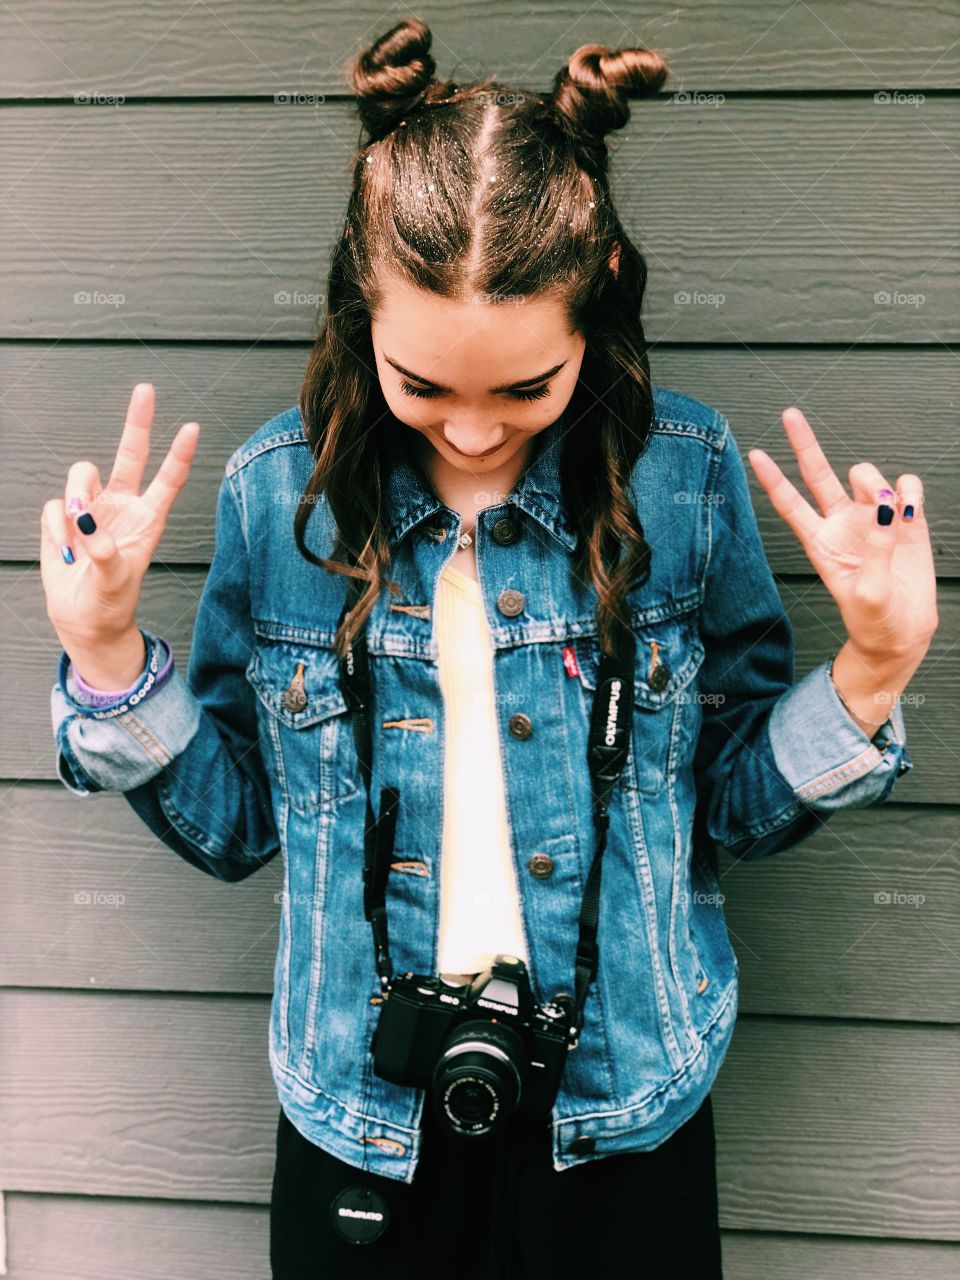 Girl with space buns and glitter in hair wearing jean jacket with camera around neck. 